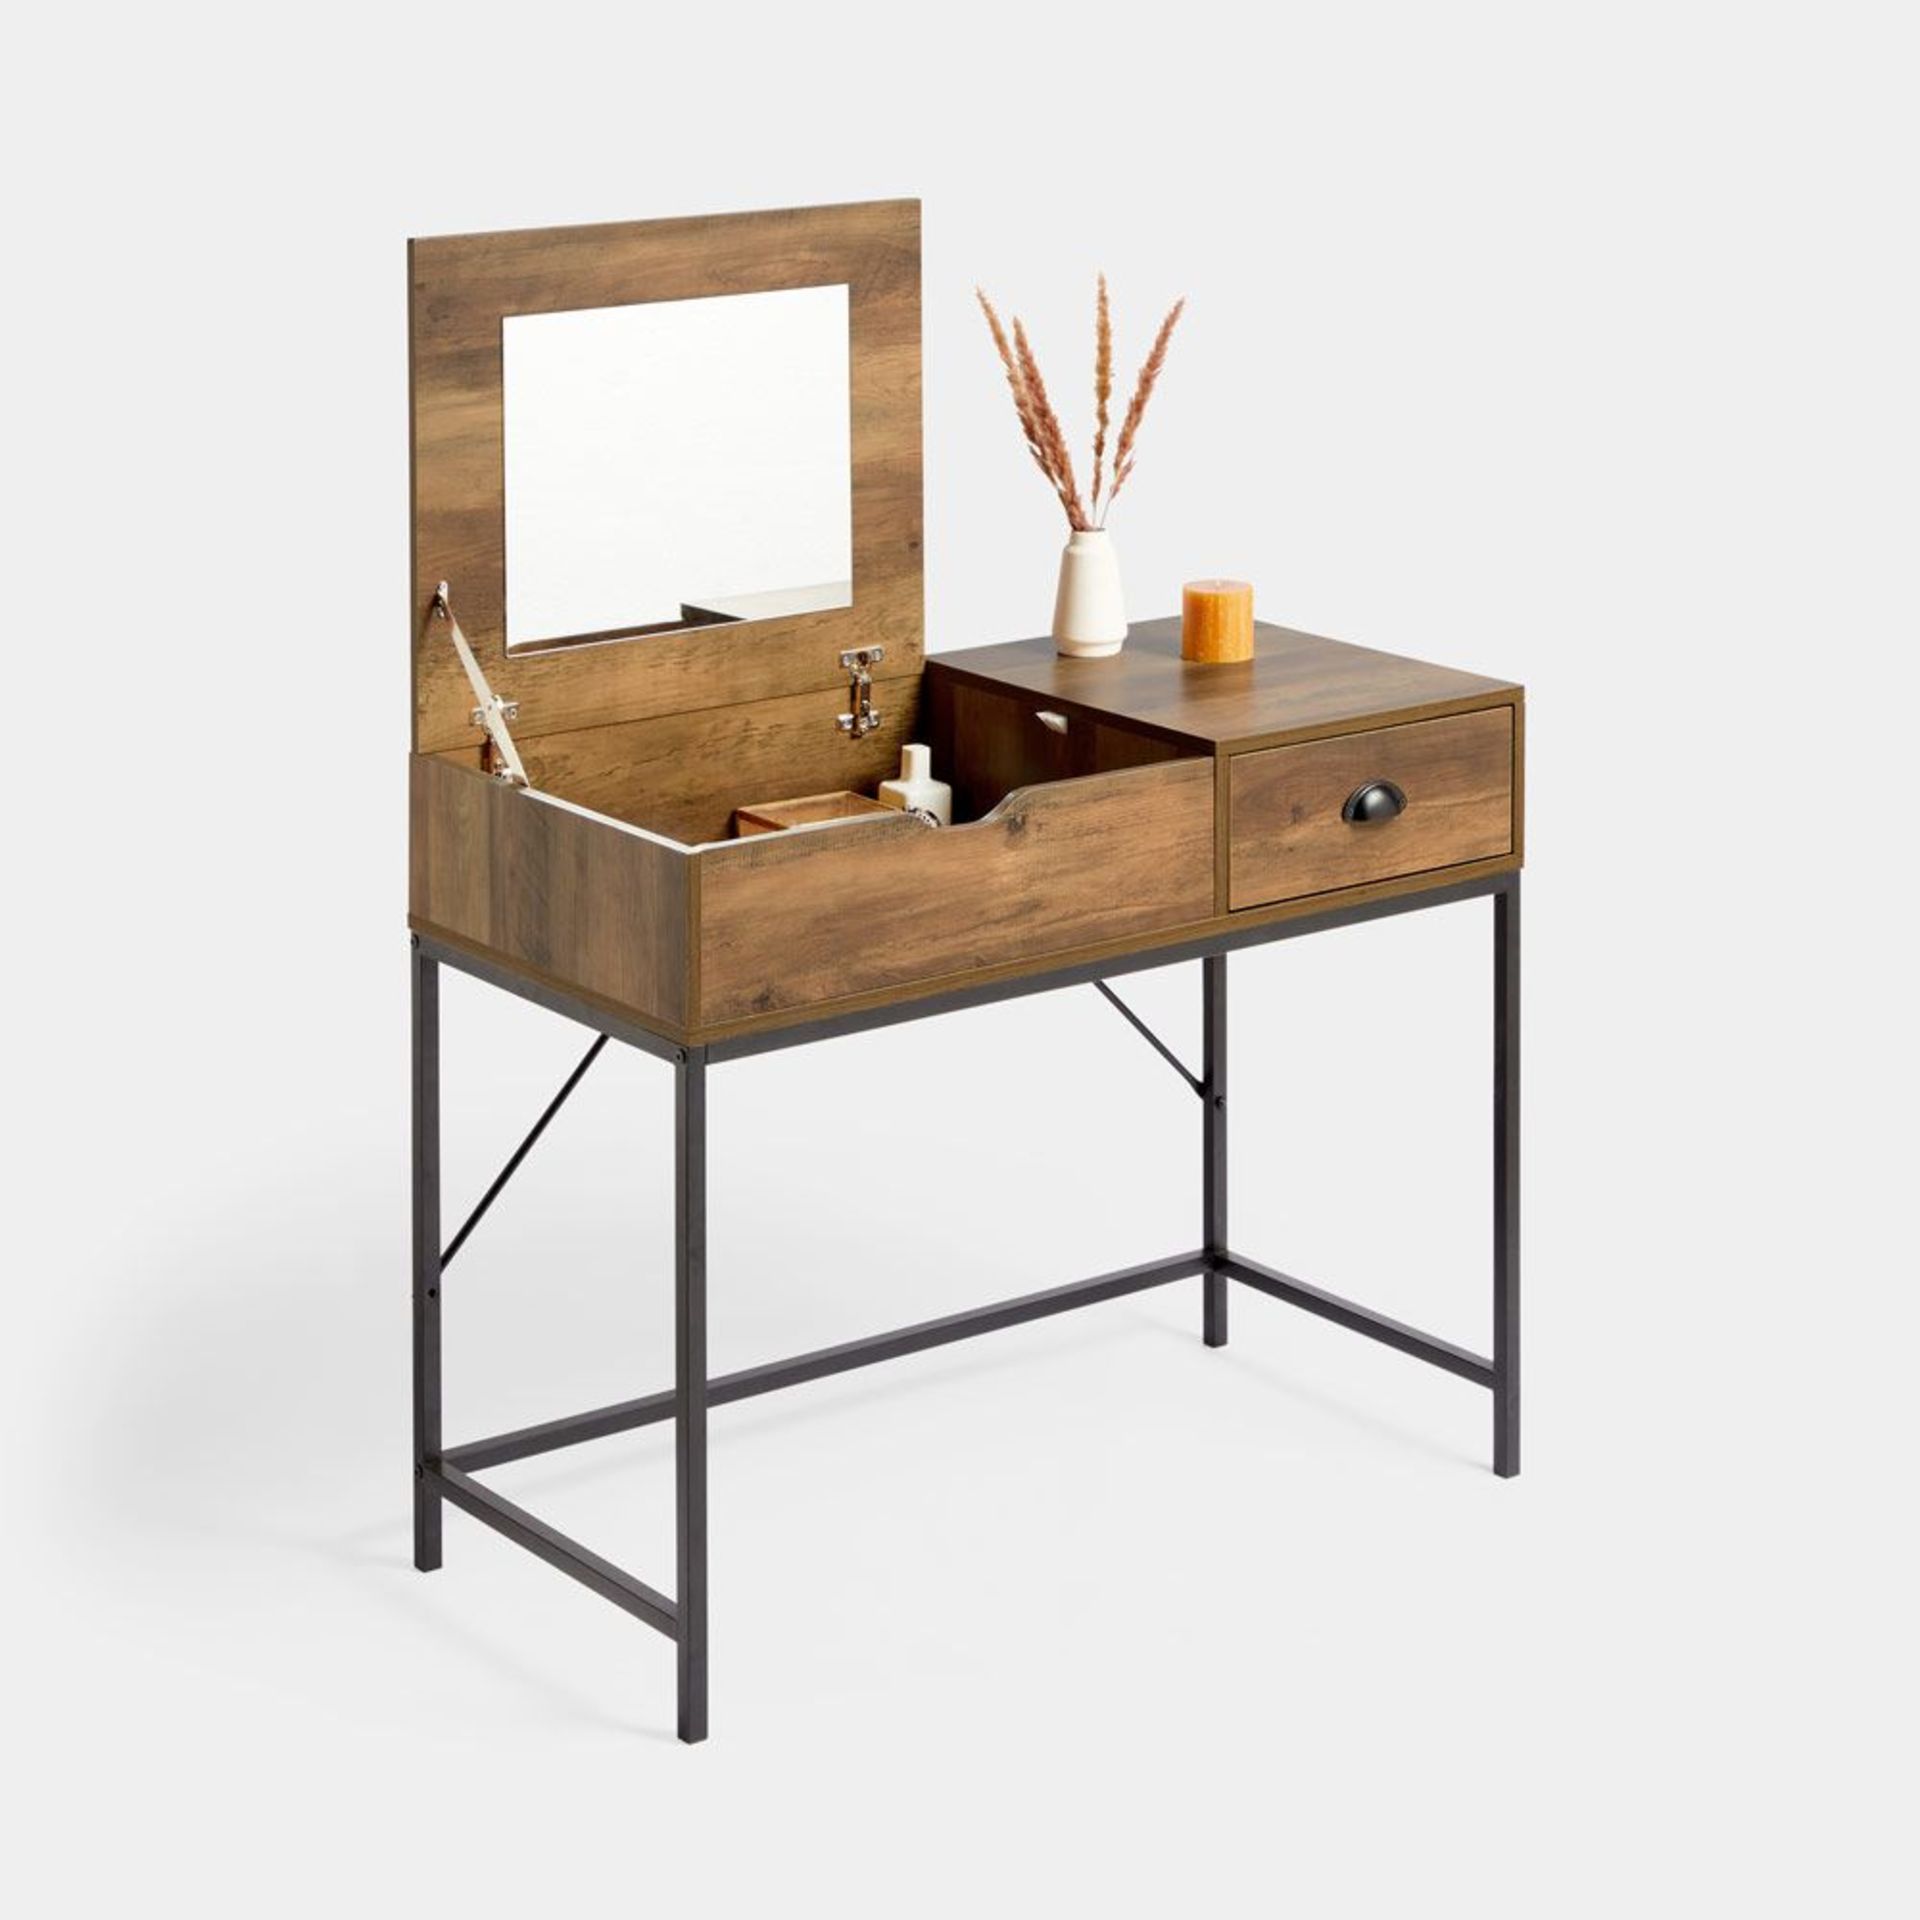 Jaxon Dressing Table with Flip Up Mirror. Featuring an industrial black metal frame and natural